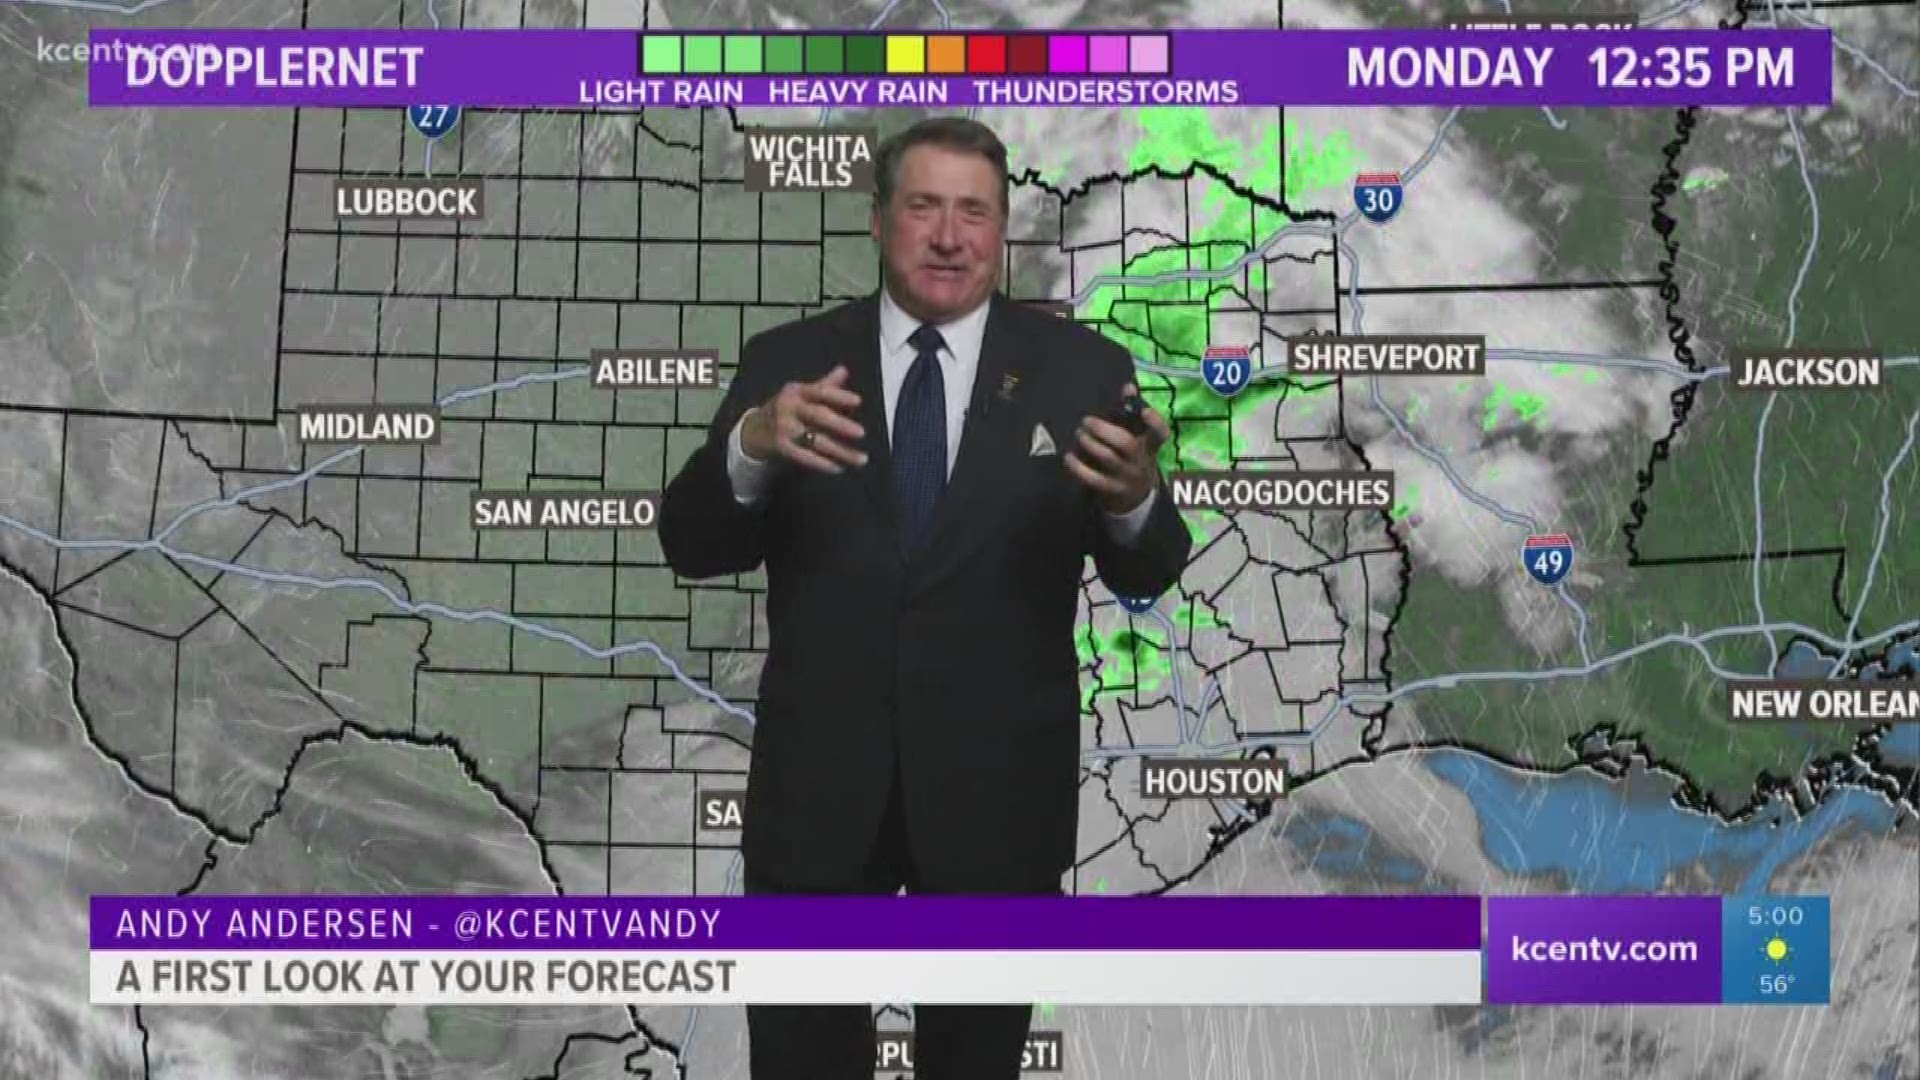 By 9 p.m., temperatures will be in the 40s, according to chief meteorologist Andy Andersen.